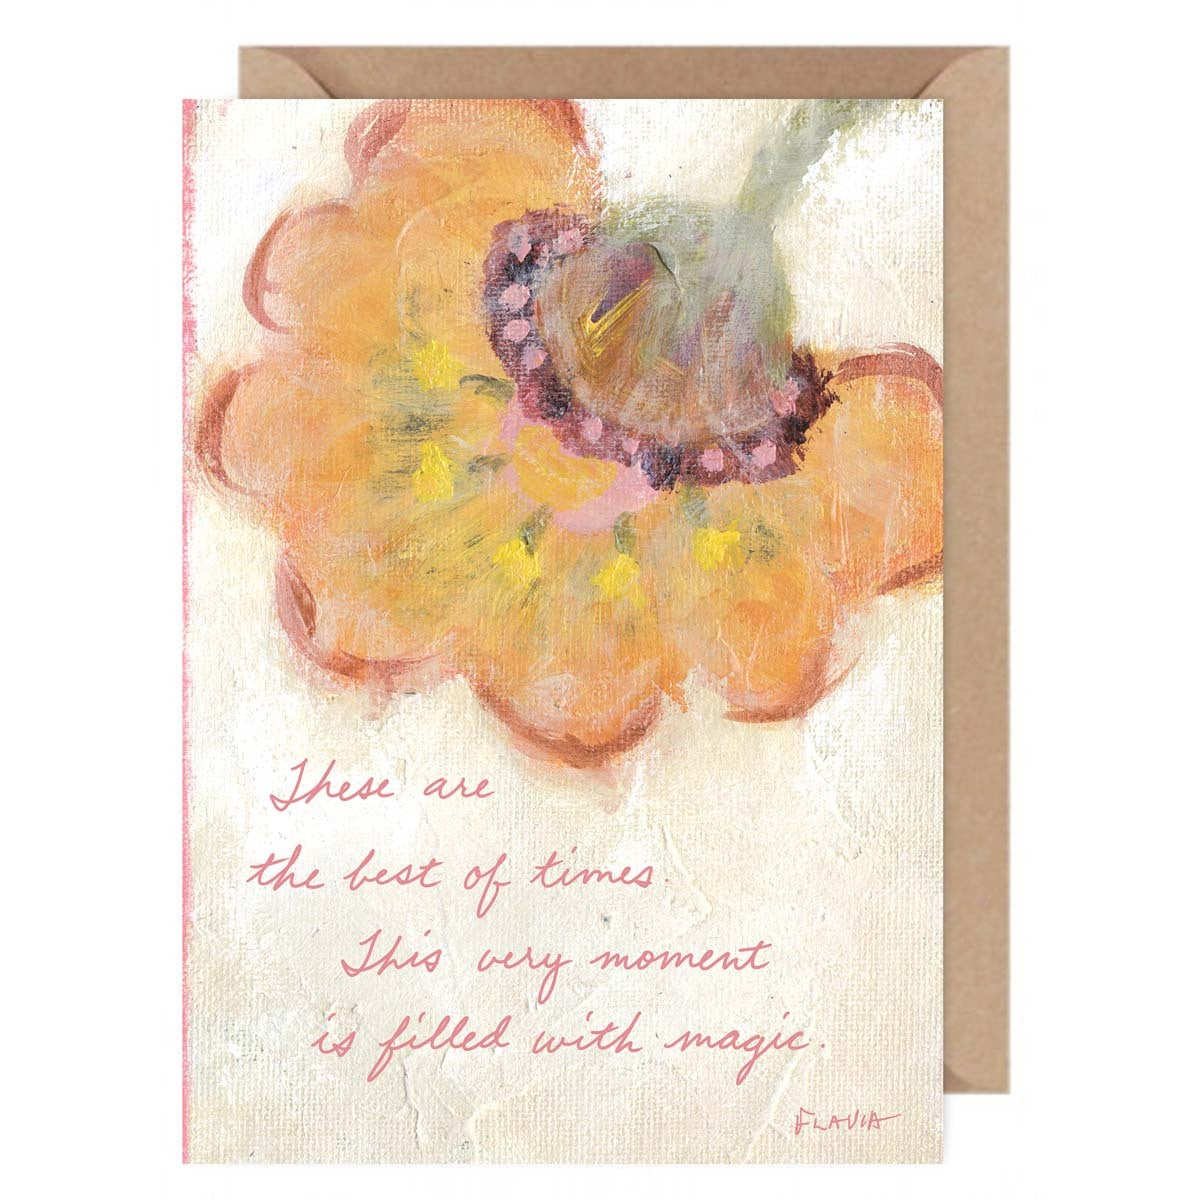 Best Times  - a Flavia Weedn inspirational greeting card  0101-0015